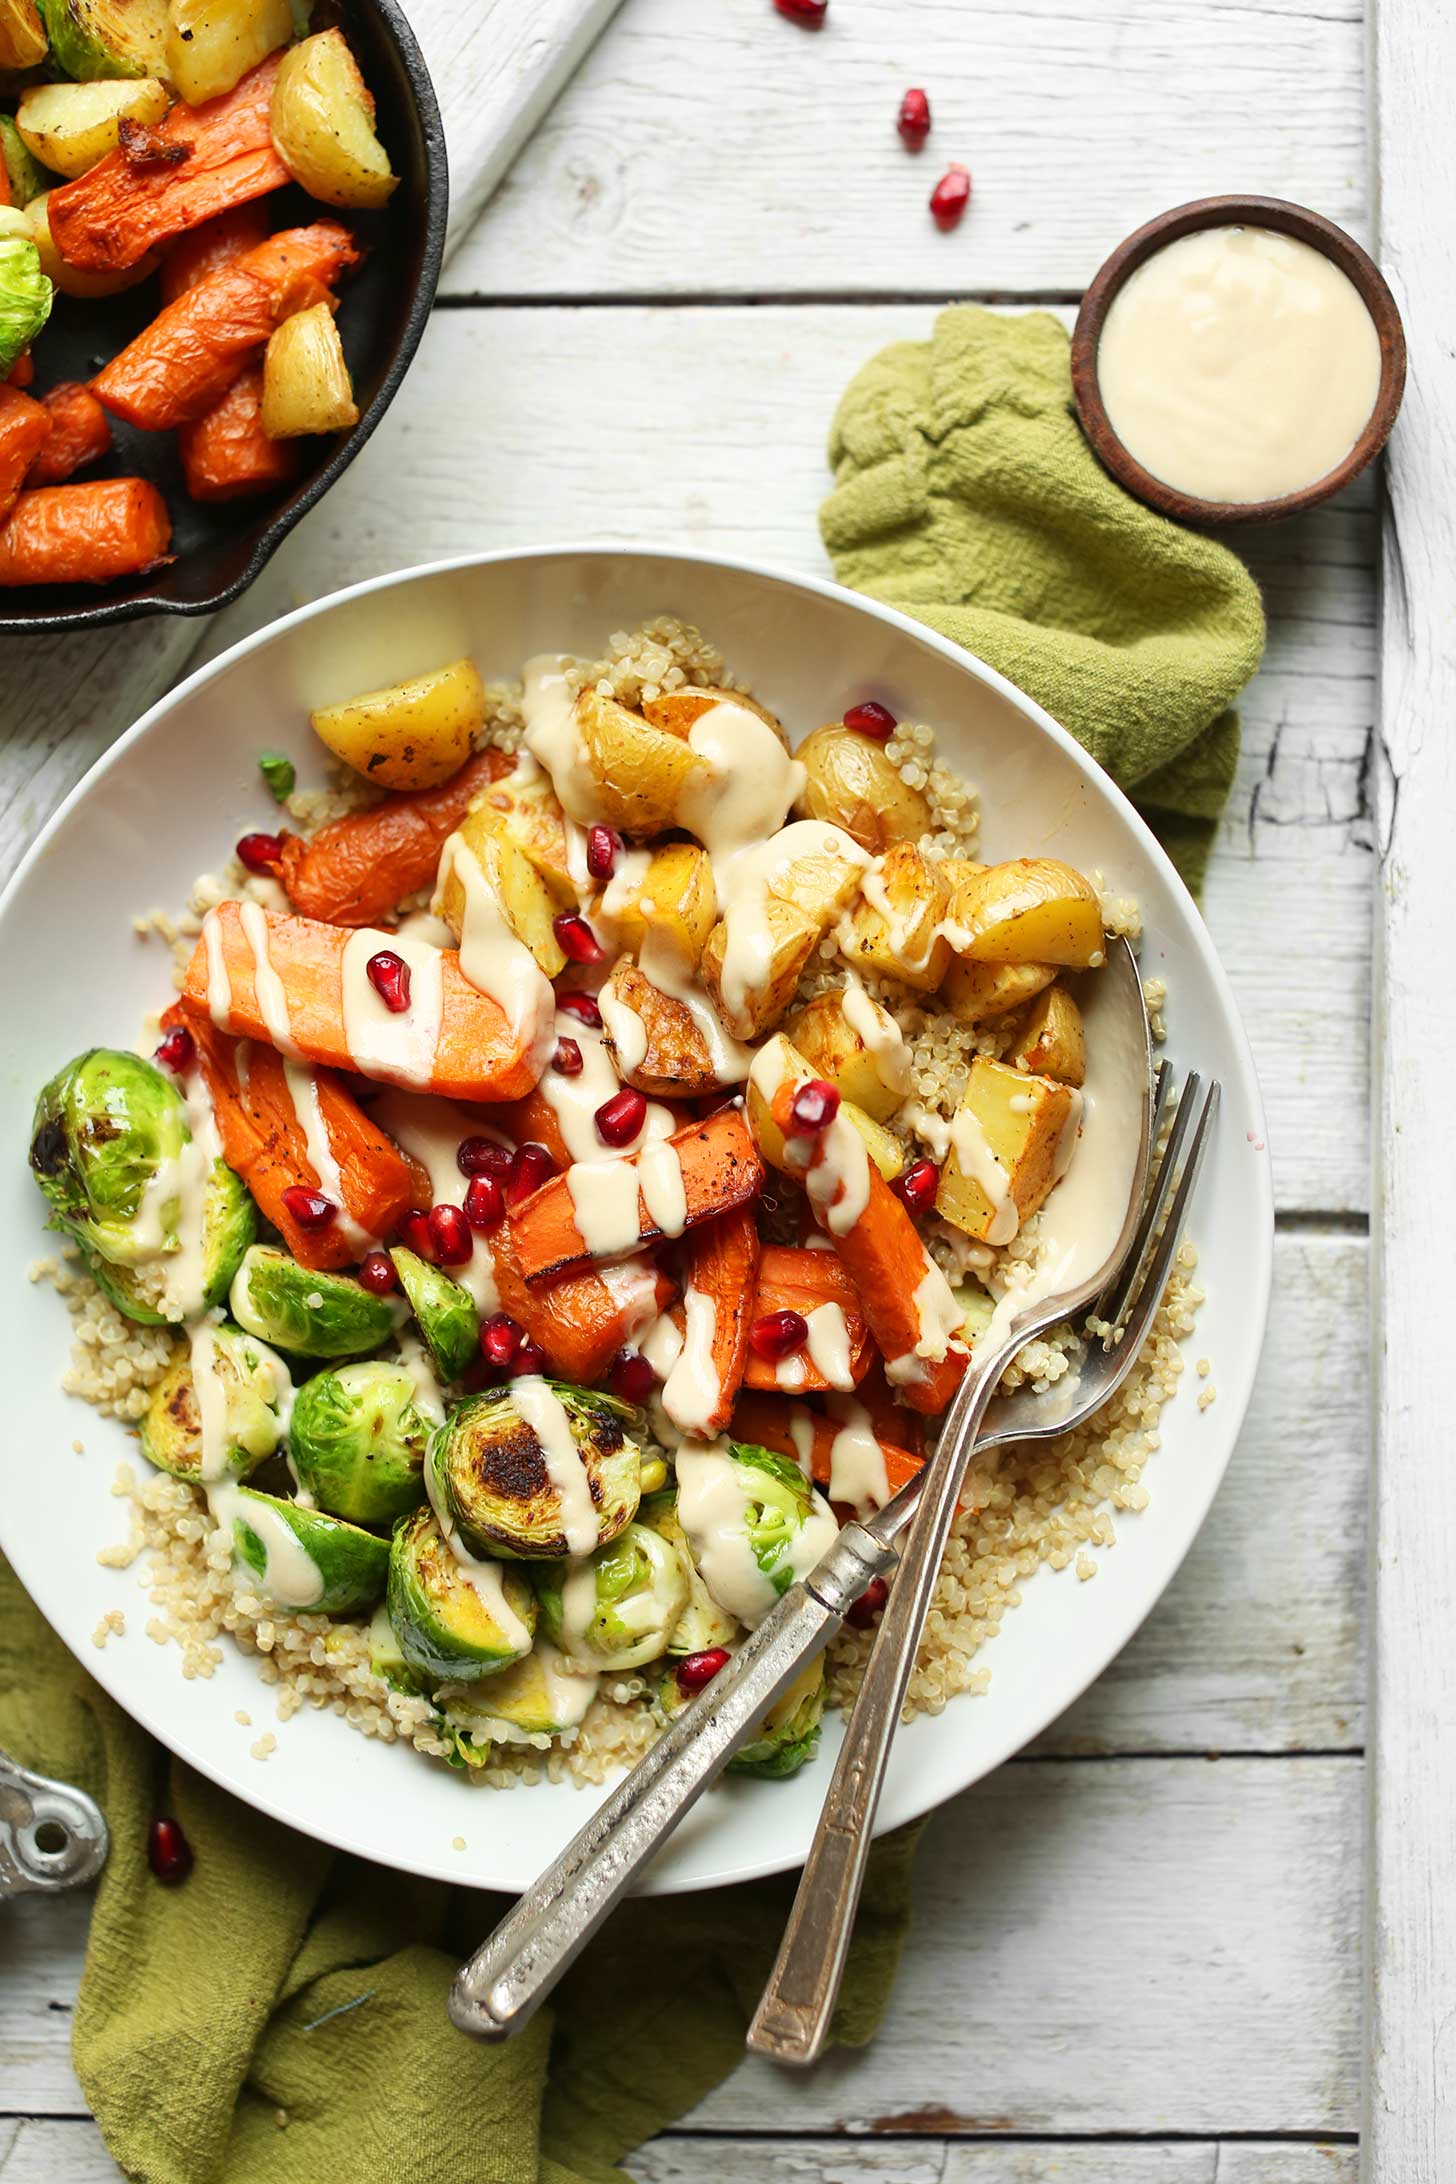 Easy healthy Roasted Vegetable and Quinoa Harvest Bowl for a gluten-free plant-based meal